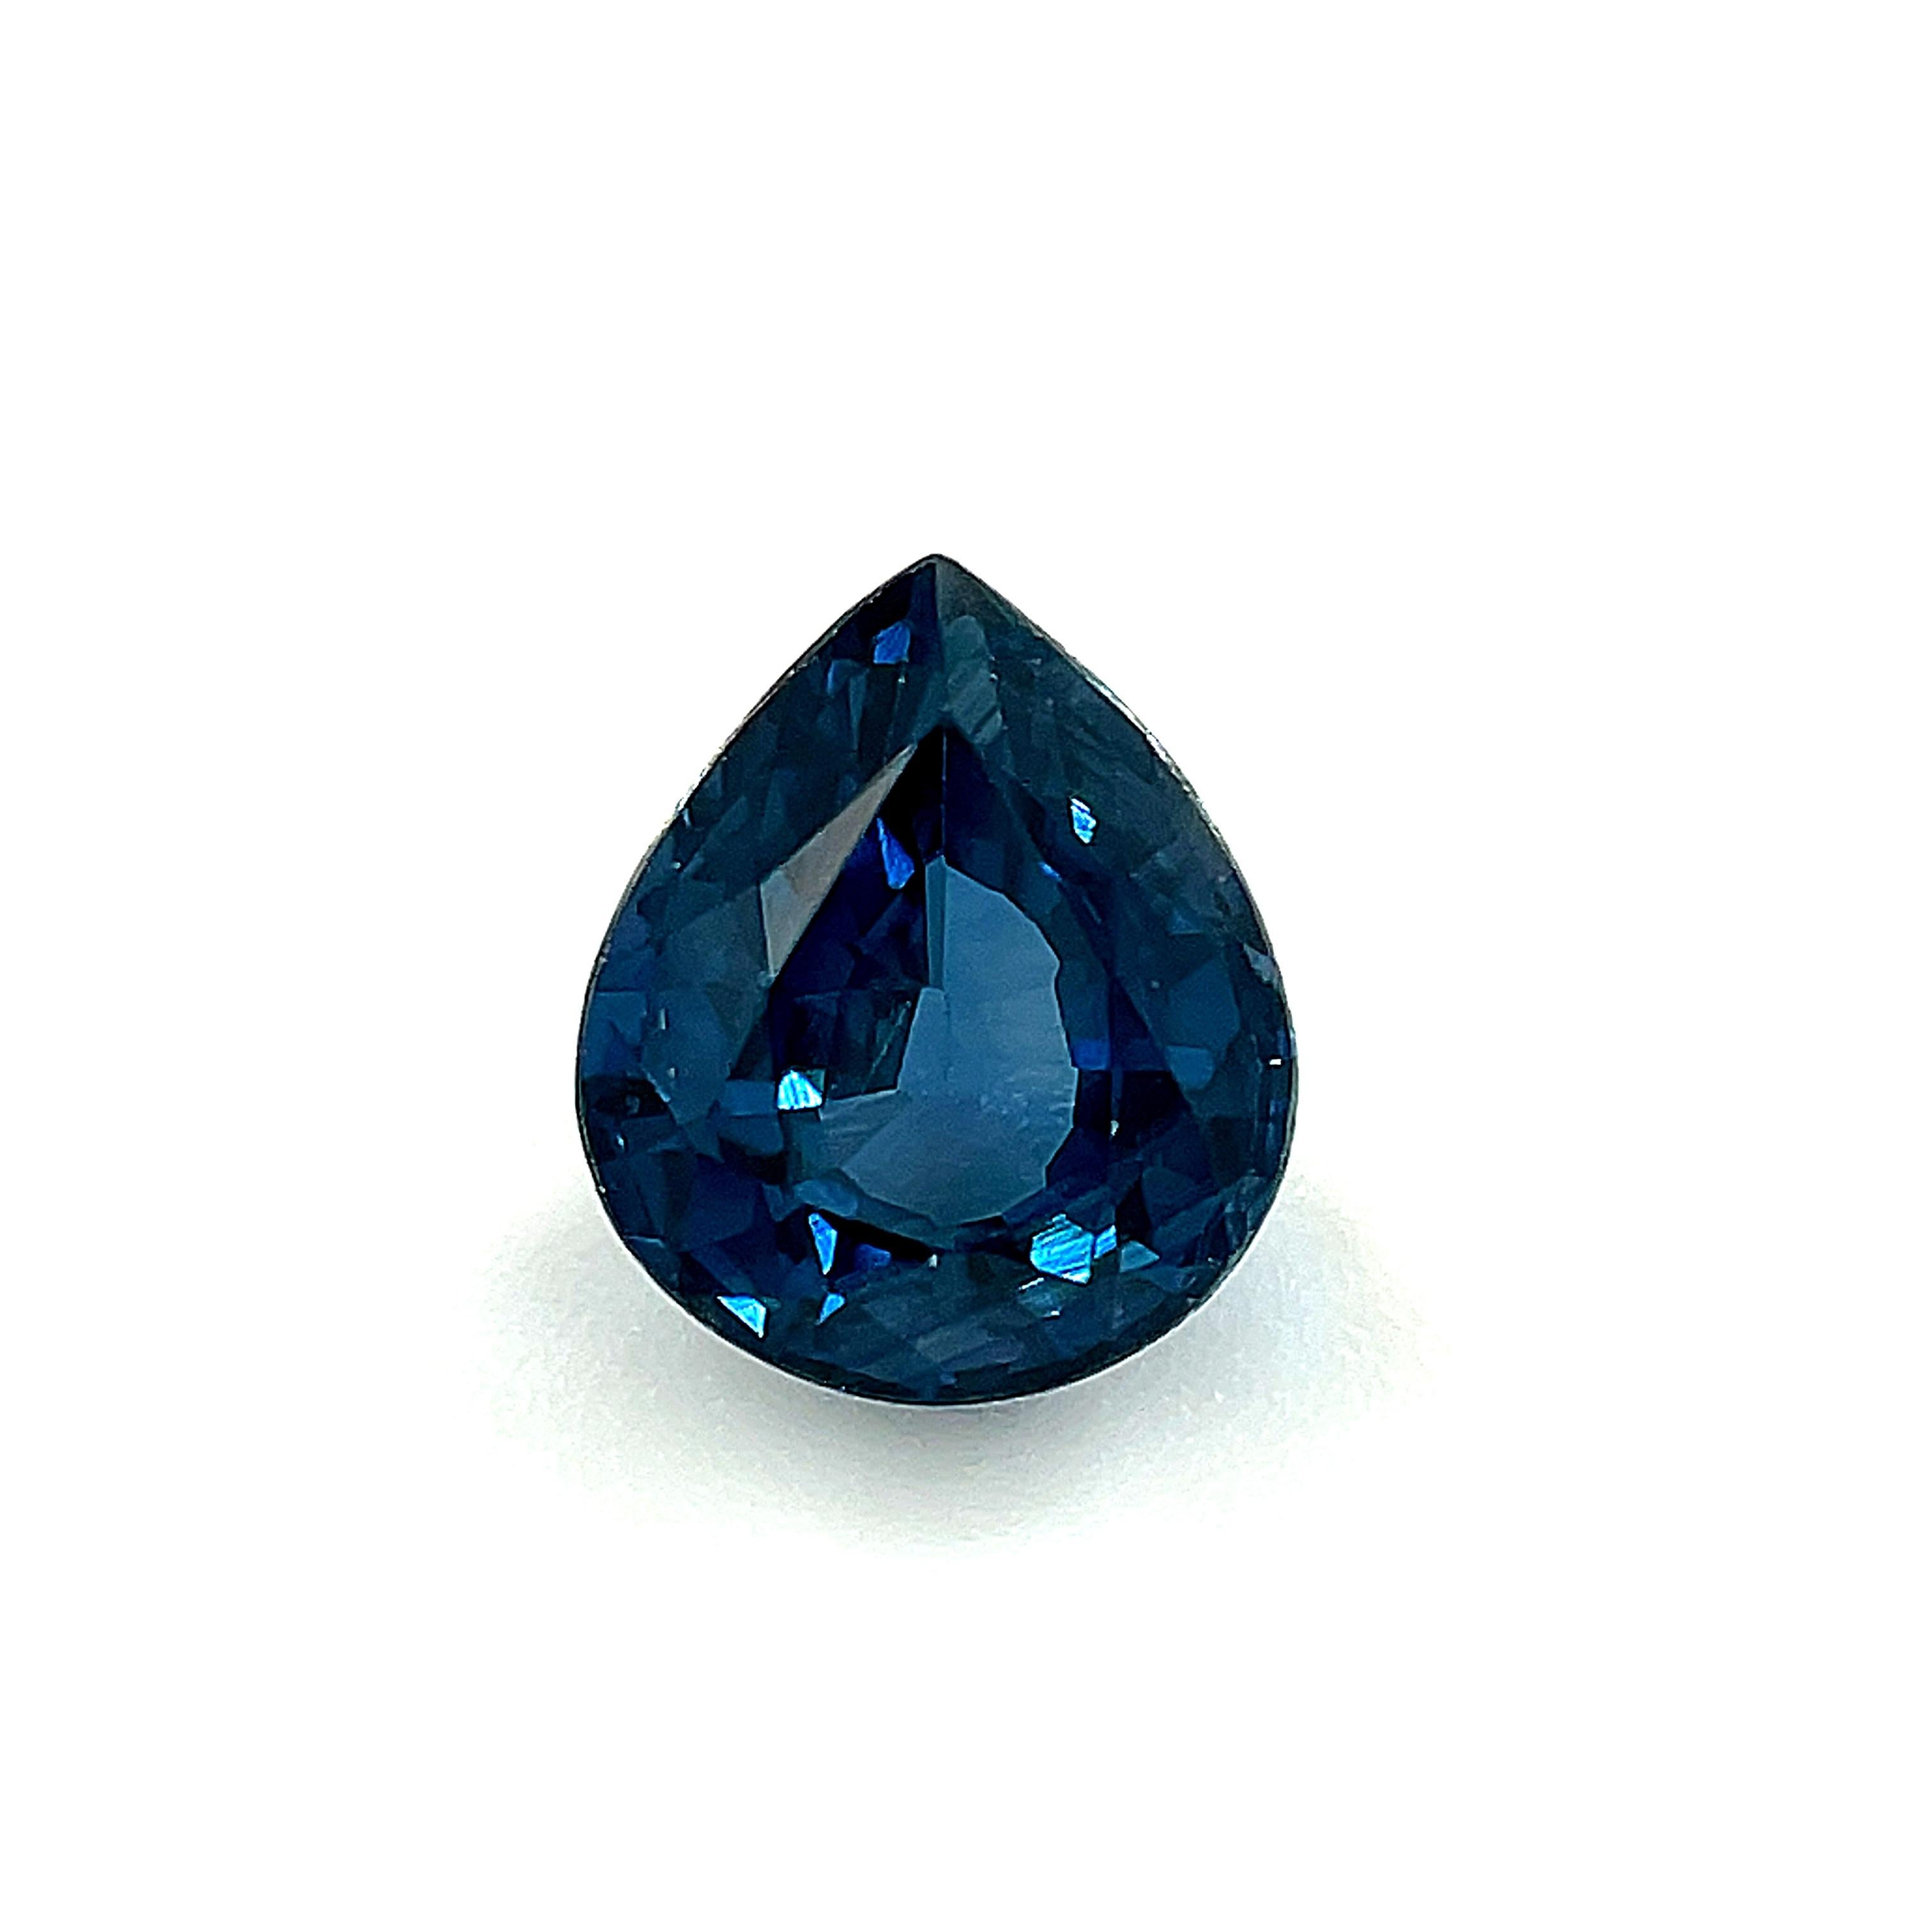 This 1.20 carat pear-shaped blue sapphire would make a lovely petite pendant for a precious gem to wear everyday! It has gorgeous Parisian blue color and is beautifully proportioned, making it ideal to set as an understated pendant with one small